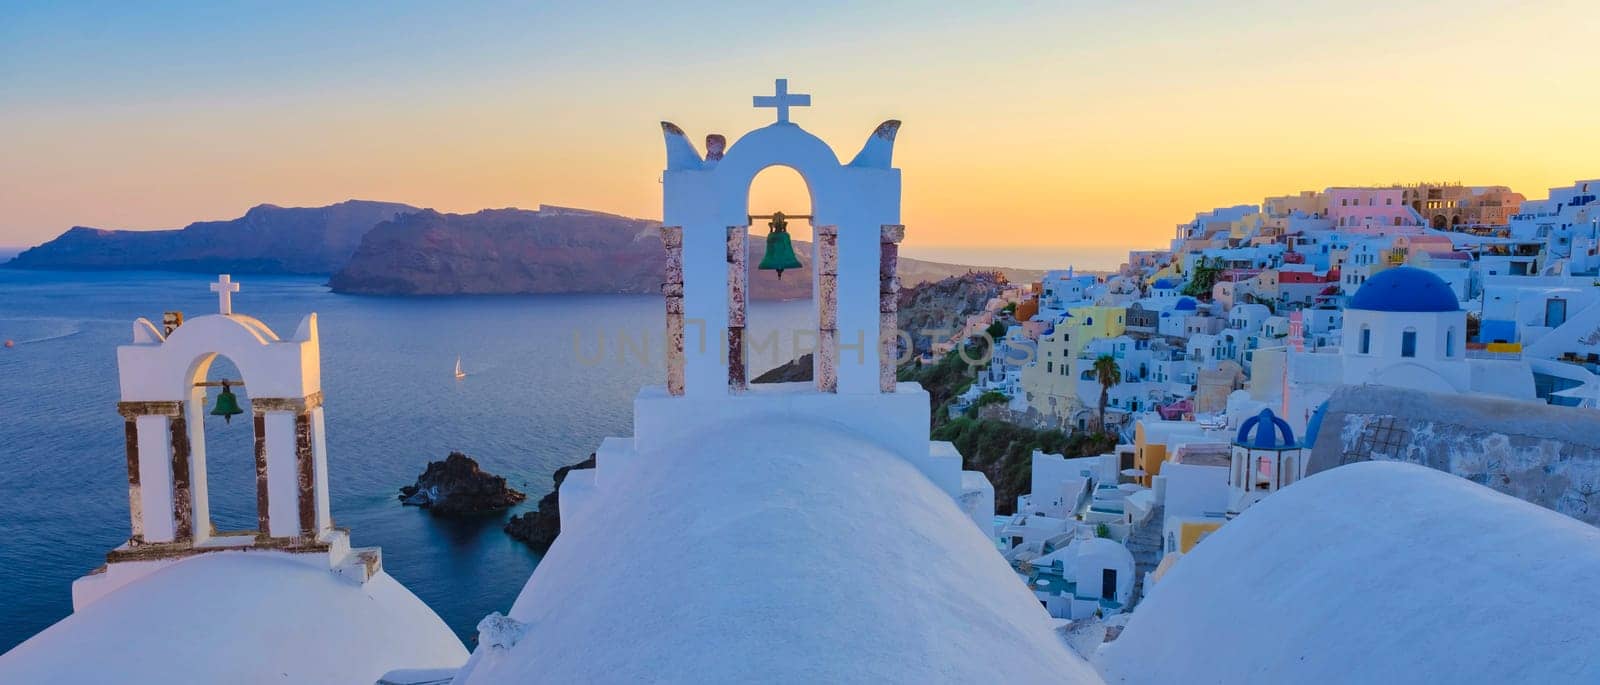 Oia Santorini Greece, a traditional Greek village in Santorini with whitewashed churches and blue domes at sunset